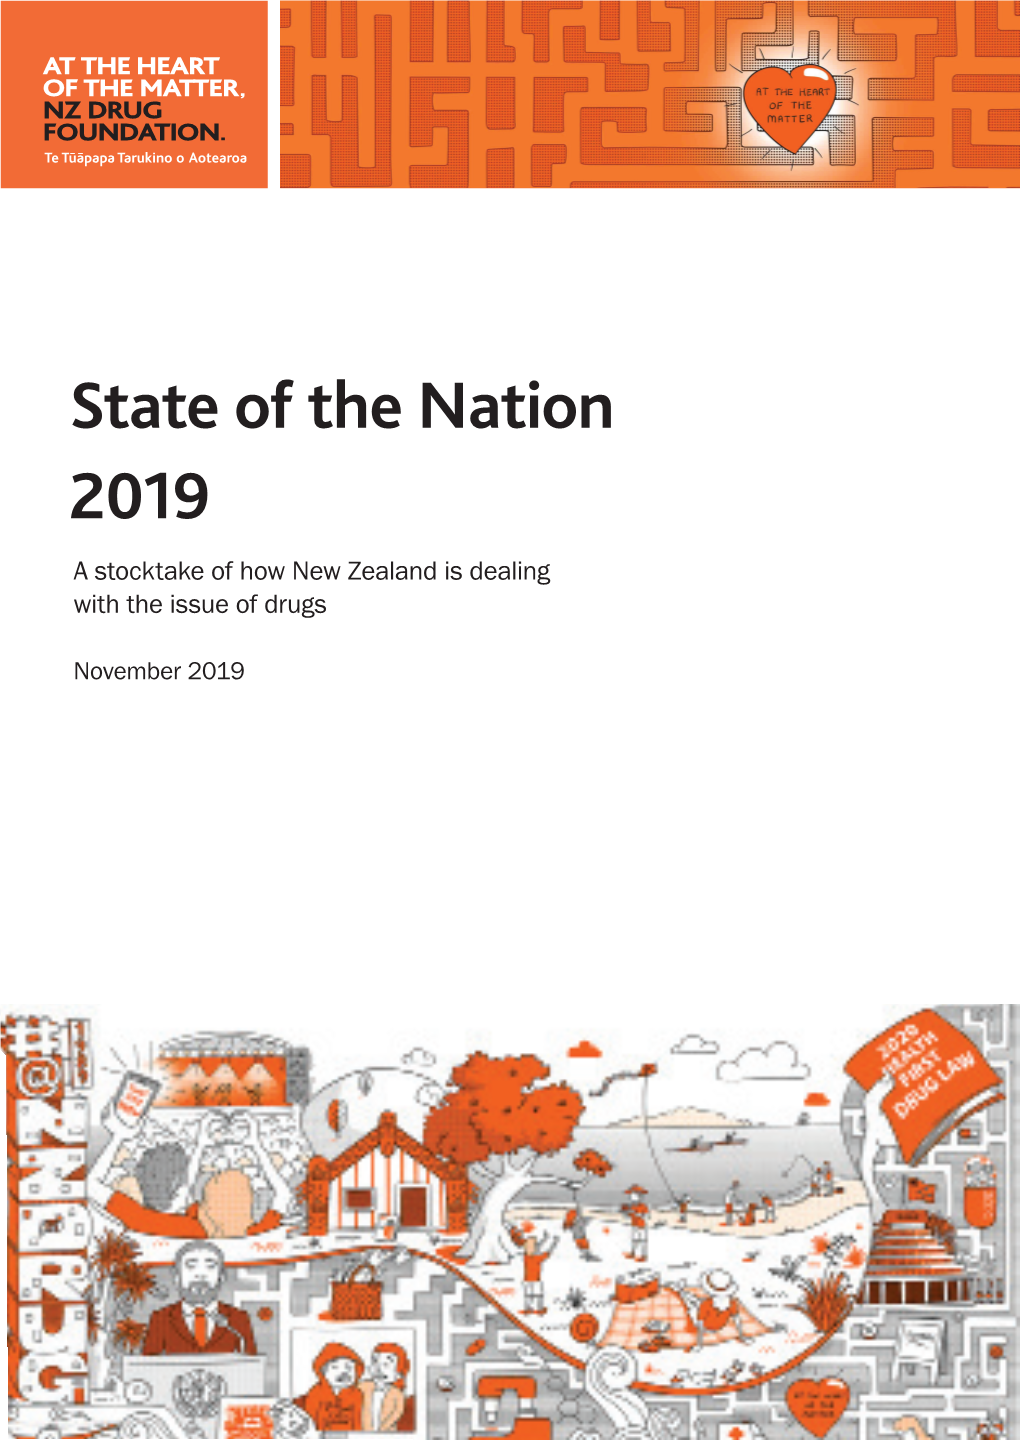 State of the Nation 2019 a Stocktake of How New Zealand Is Dealing with the Issue of Drugs